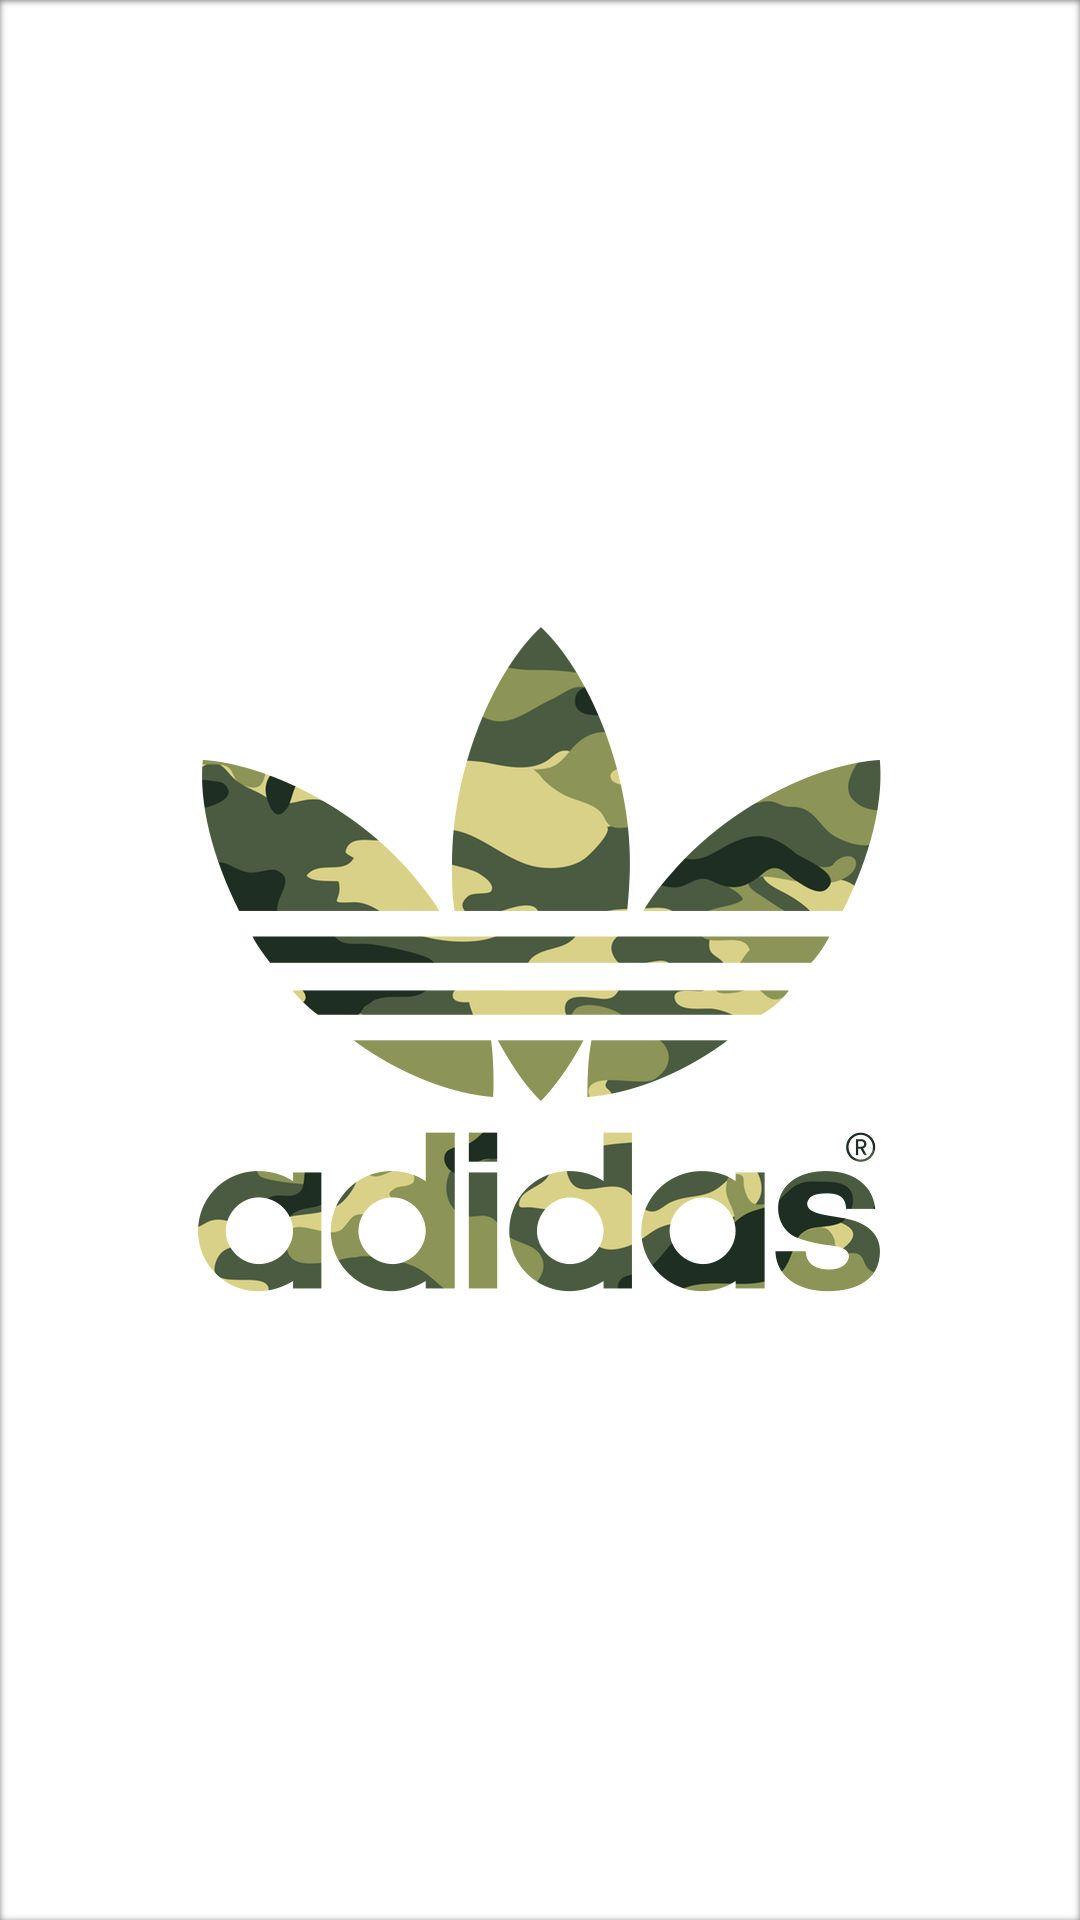 Camouflage Logo - adidas Logo Camouflage Pattern iPhone Wallpaper | wallpapers ...